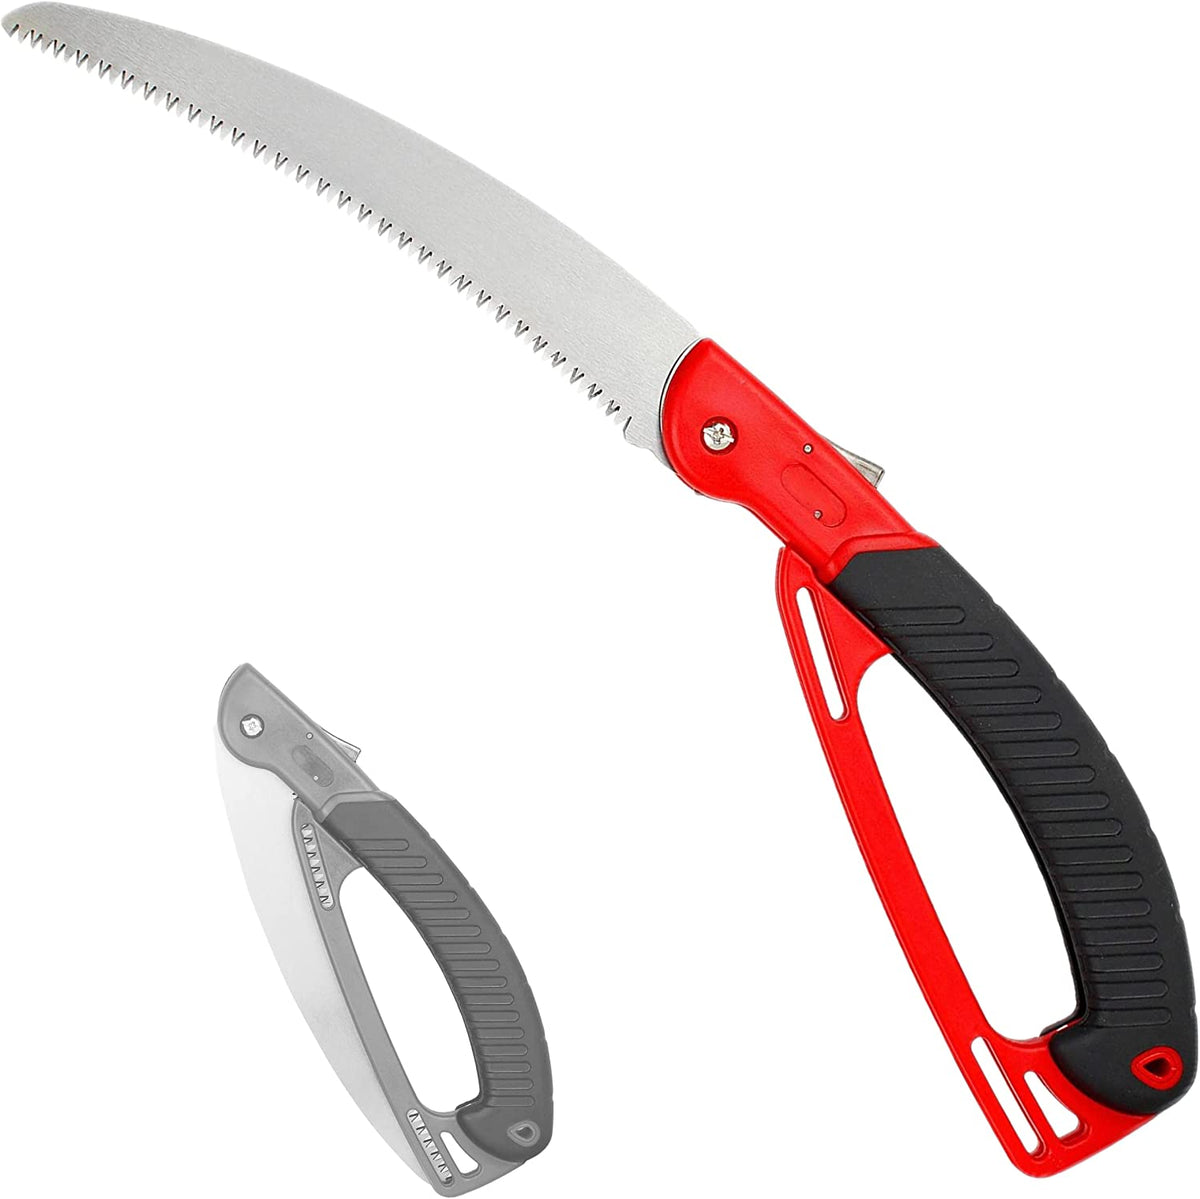 Mastiff Gears ® All-Purpose Camping Saw Hand Pruning Saws 250 MM Curved Saw